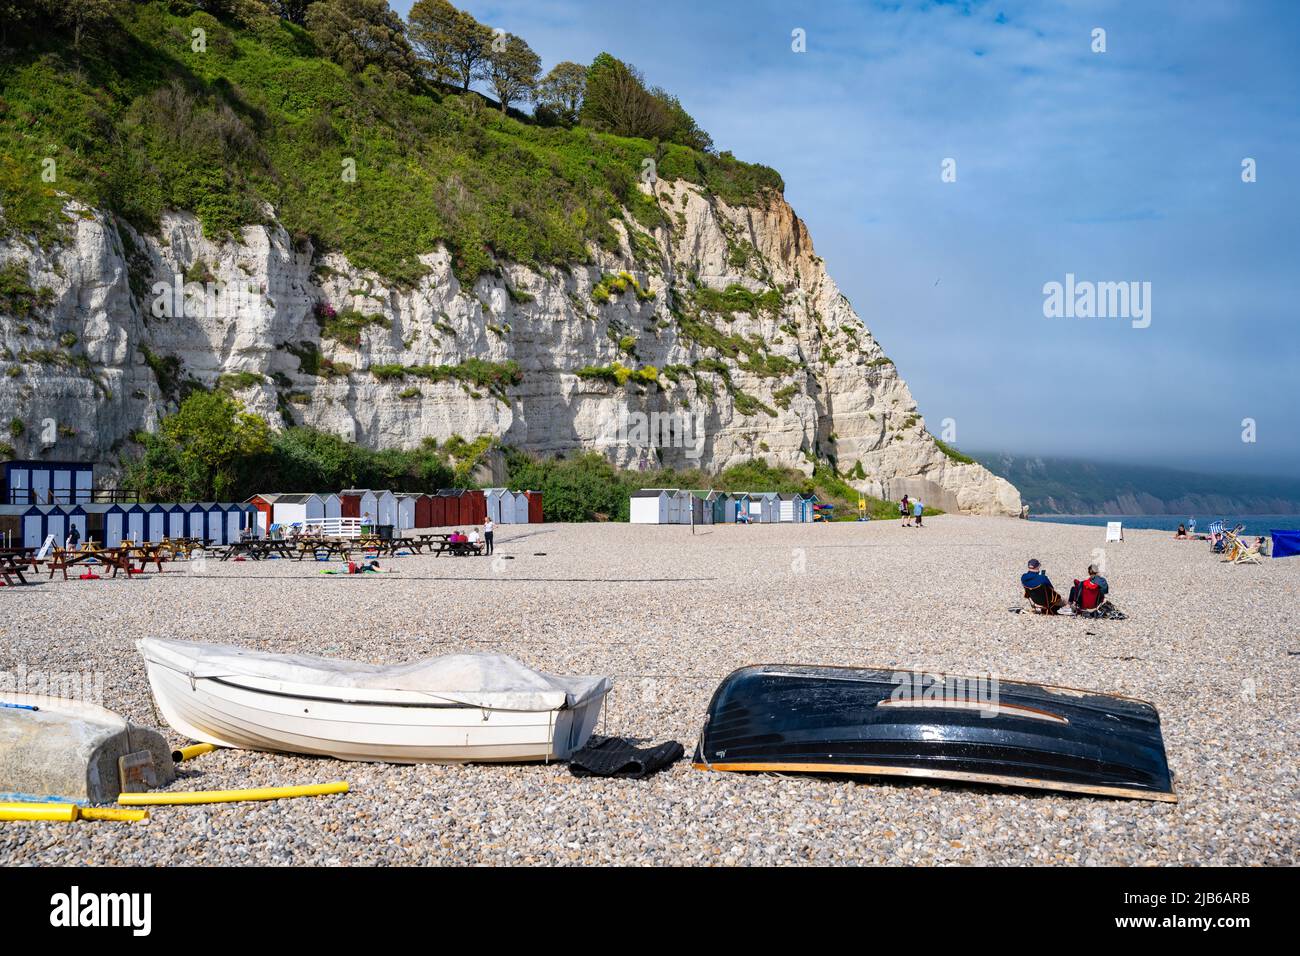 Boats on the shingle beach and limestone cliffs at Beer, Devon, UK Stock Photo